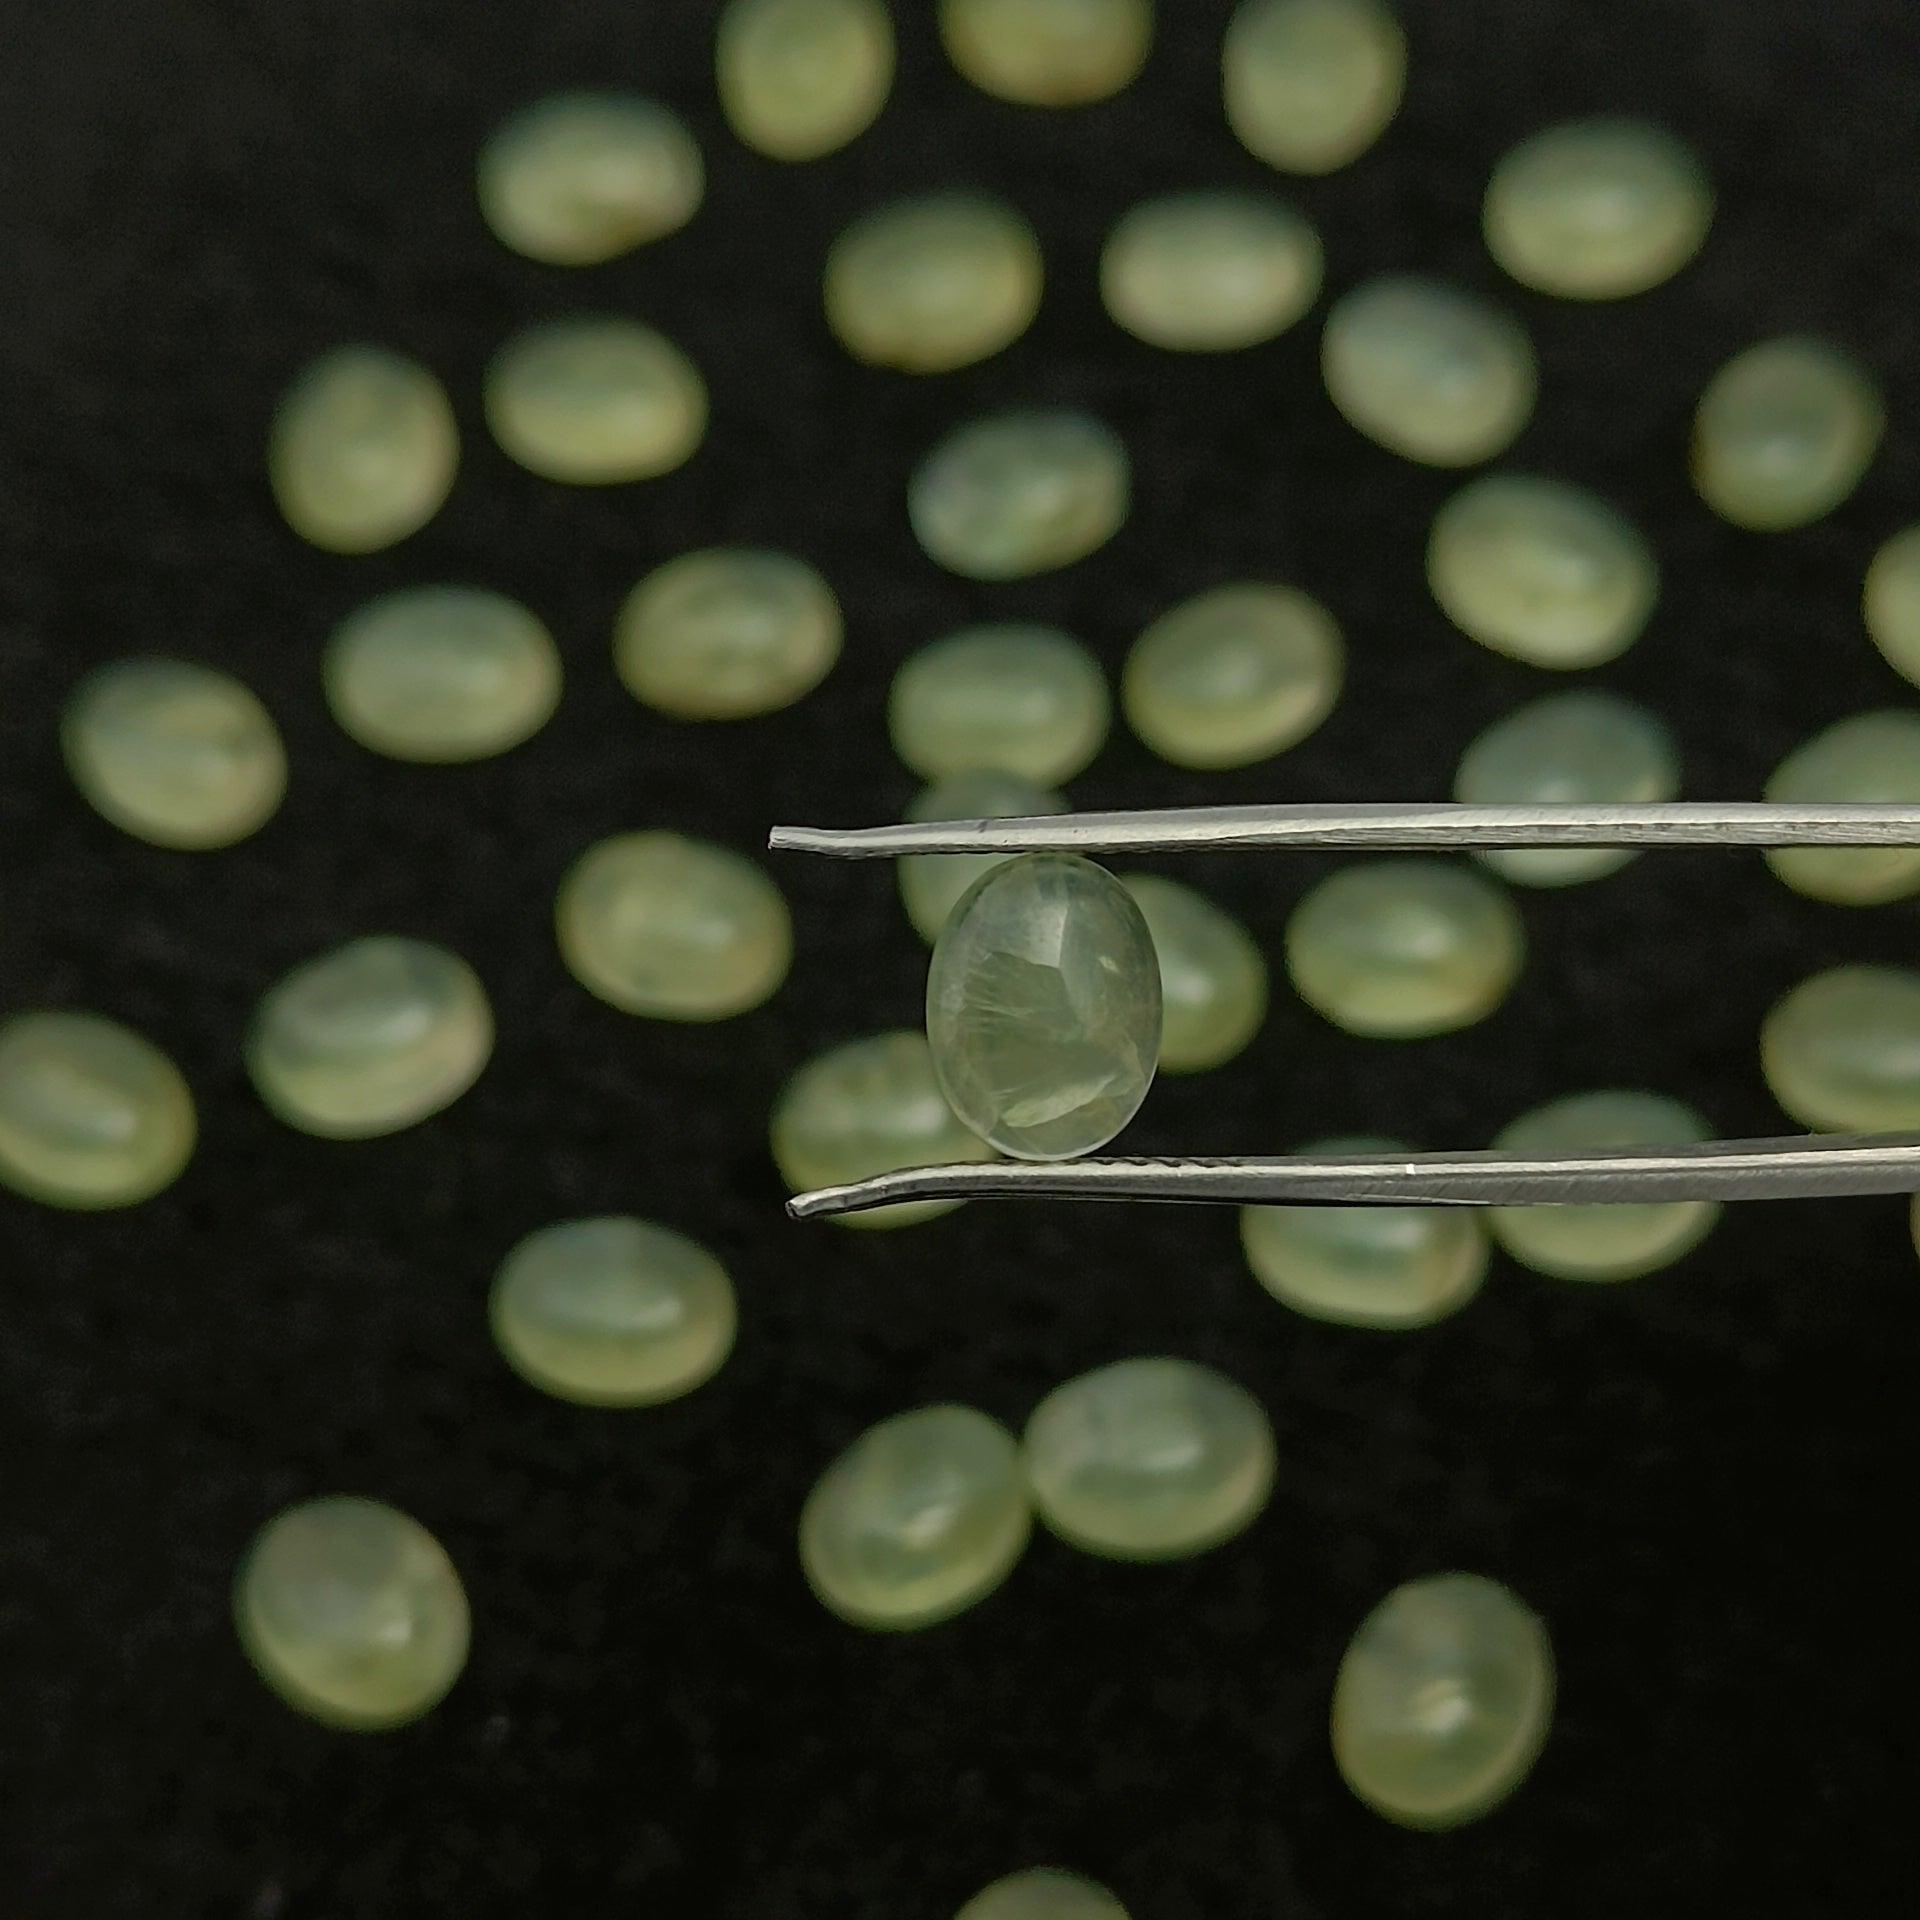 Natural Prehnite Oval Shape Calibrated | Cabochon Gemstone Healing Crystal | Raw Gemstone for Jewelry making | Unique Gemstone Cabochon - Silverhubjewels